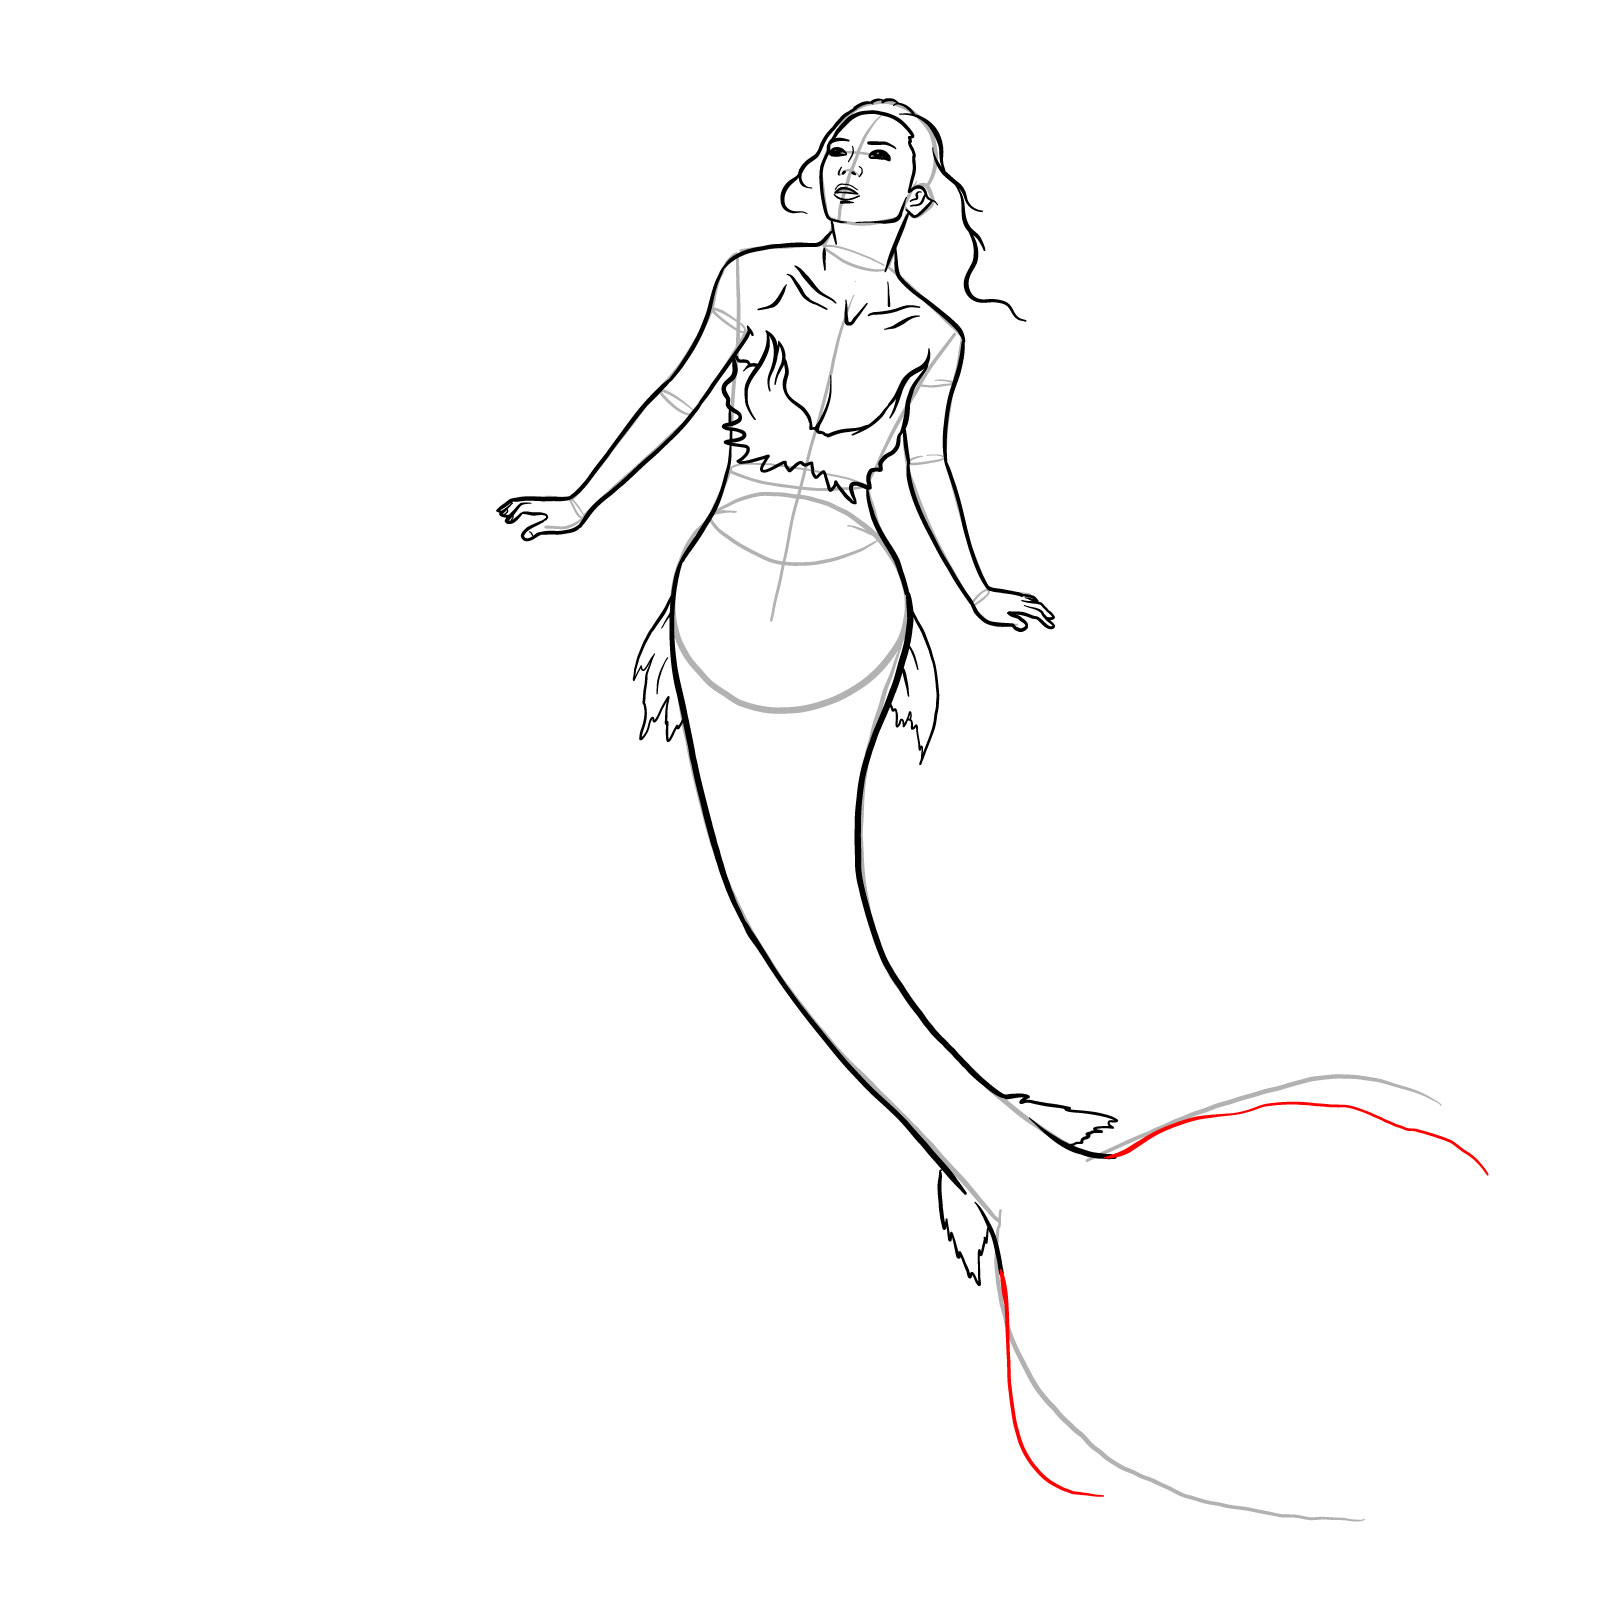 How to draw a Mermaid - step 22